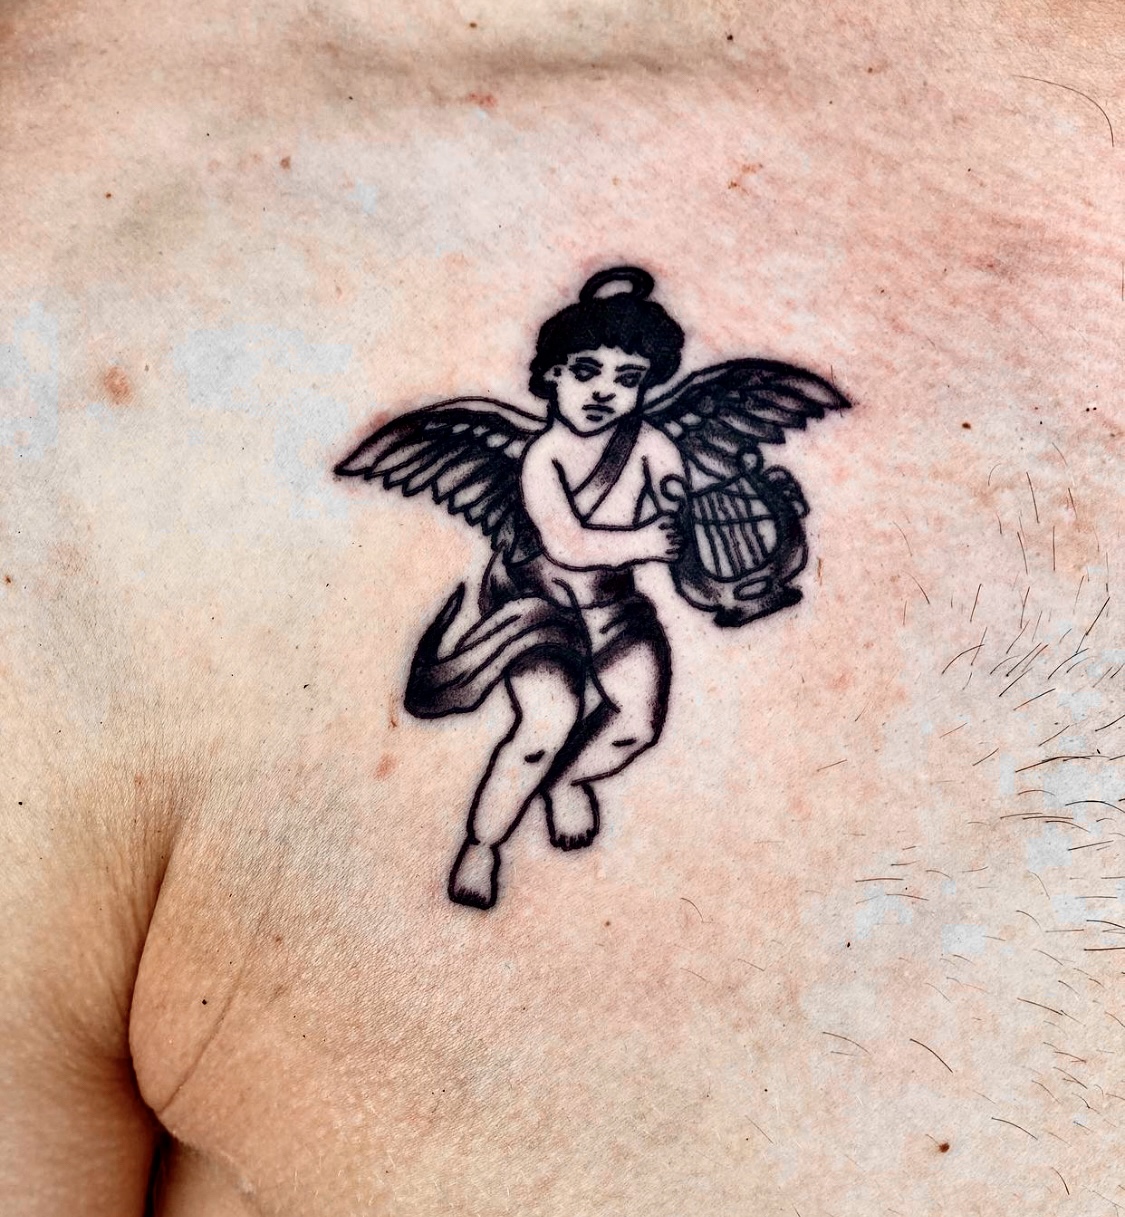 Tattoo of an angel on a mans chest